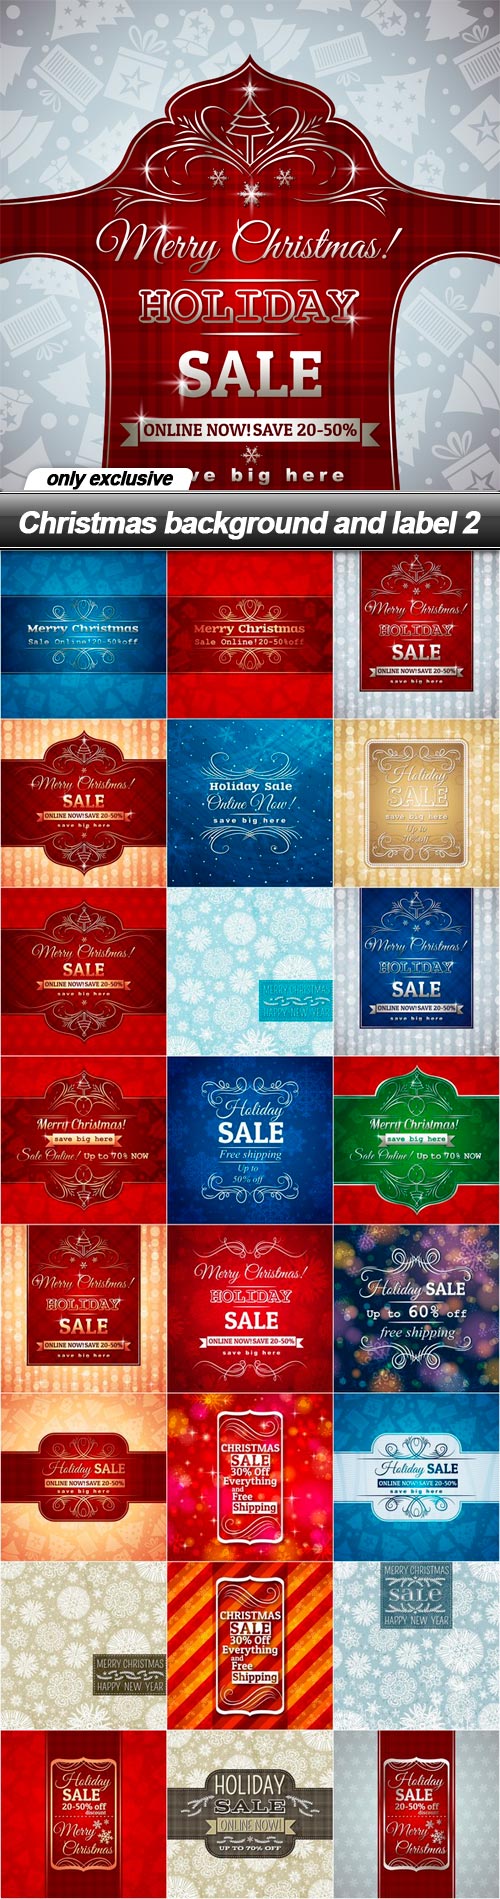 Christmas background and label 2 - 25 EPS